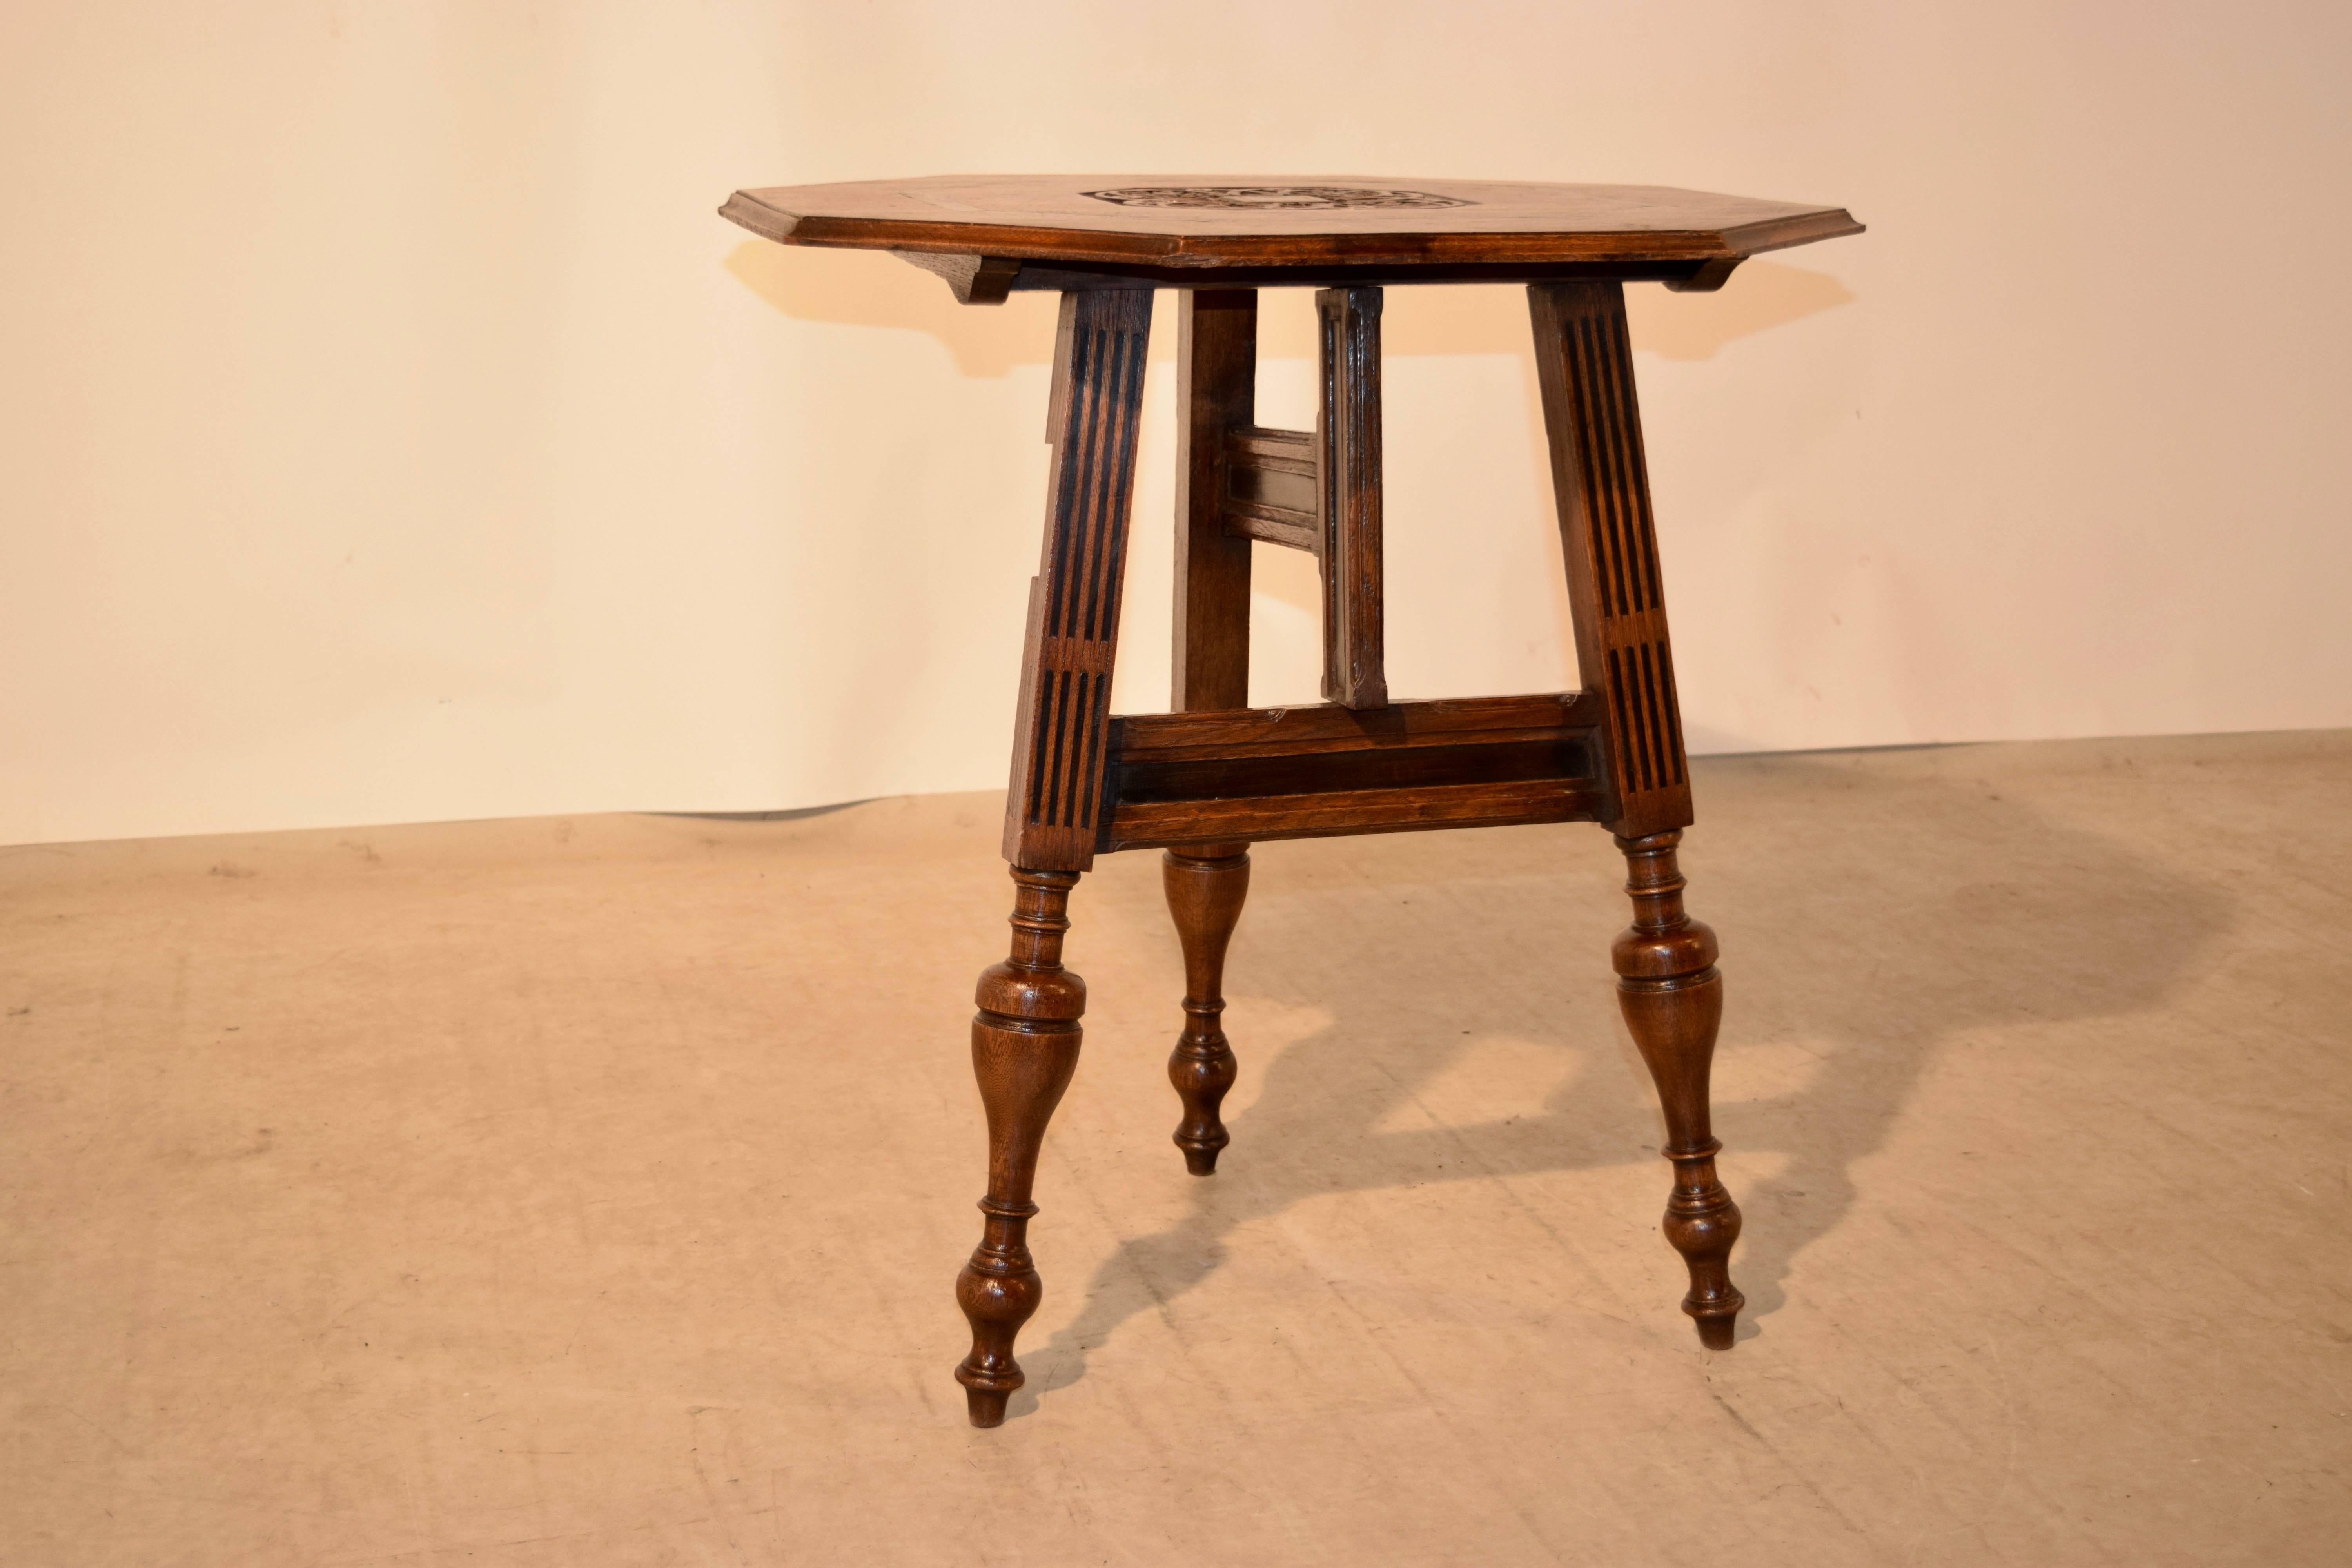 Victorian 19th Century Dutch Carriage Table For Sale